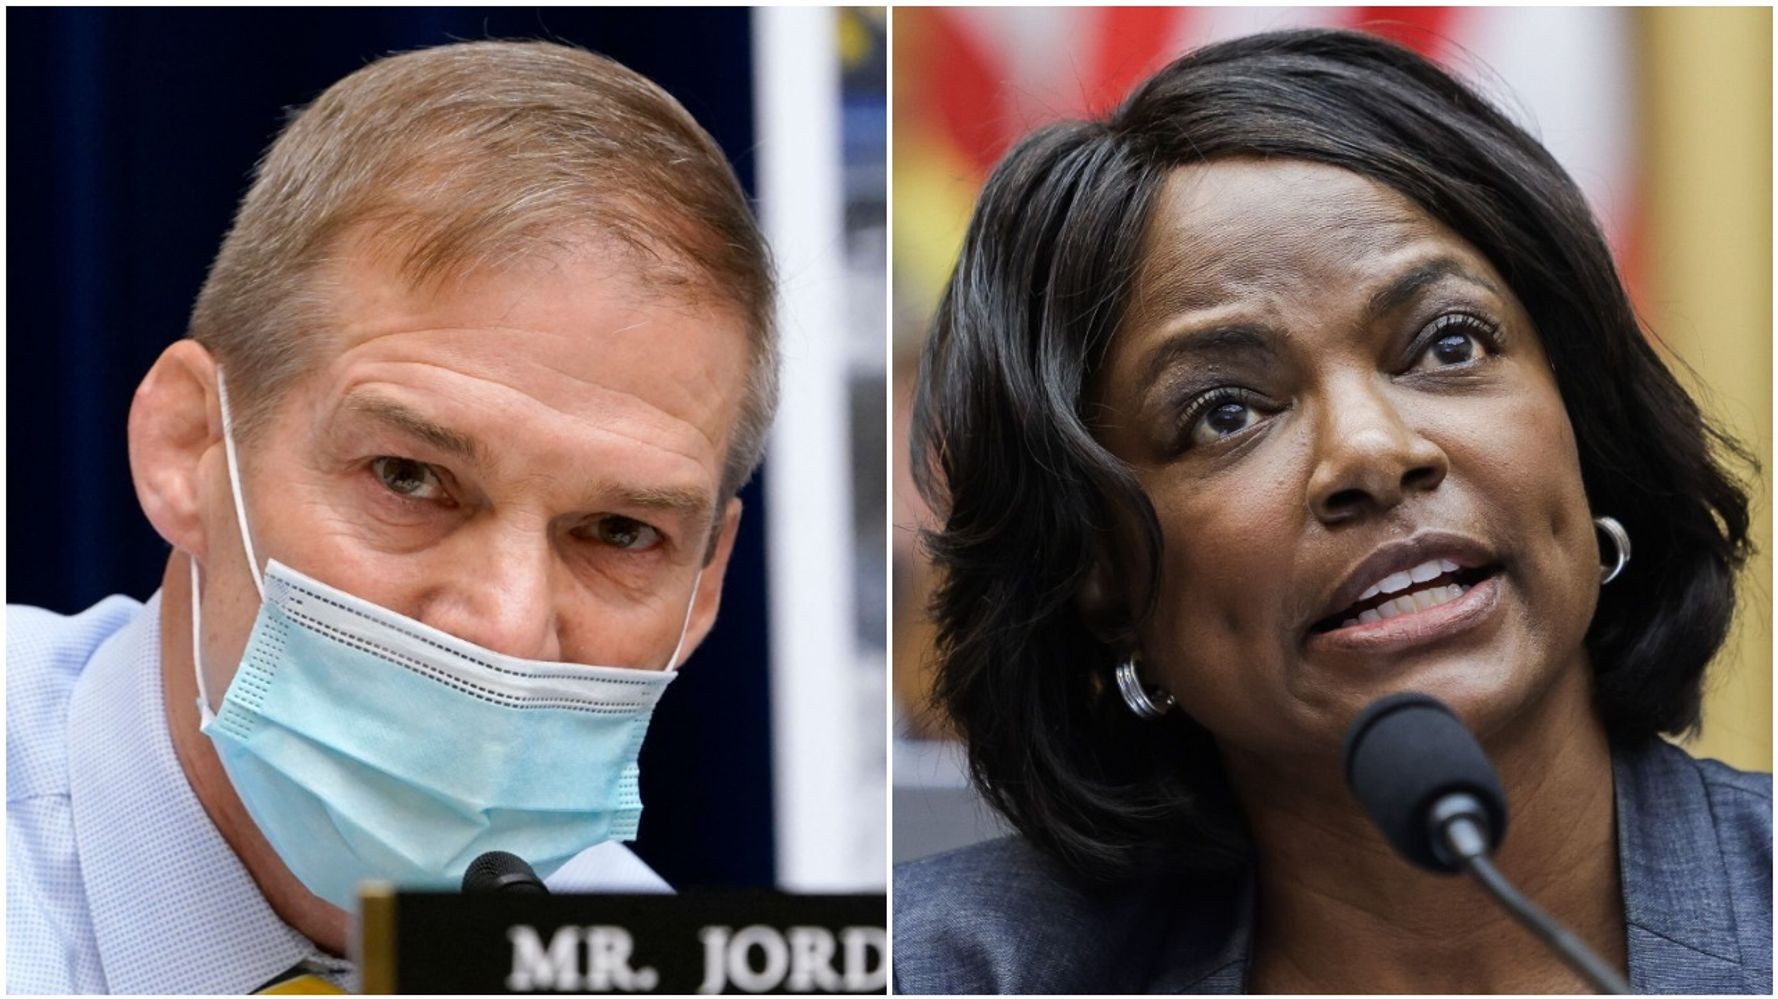 Rep. Val Demings Goes Off On Jim Jordan In Fiery Shouting Match About Policing